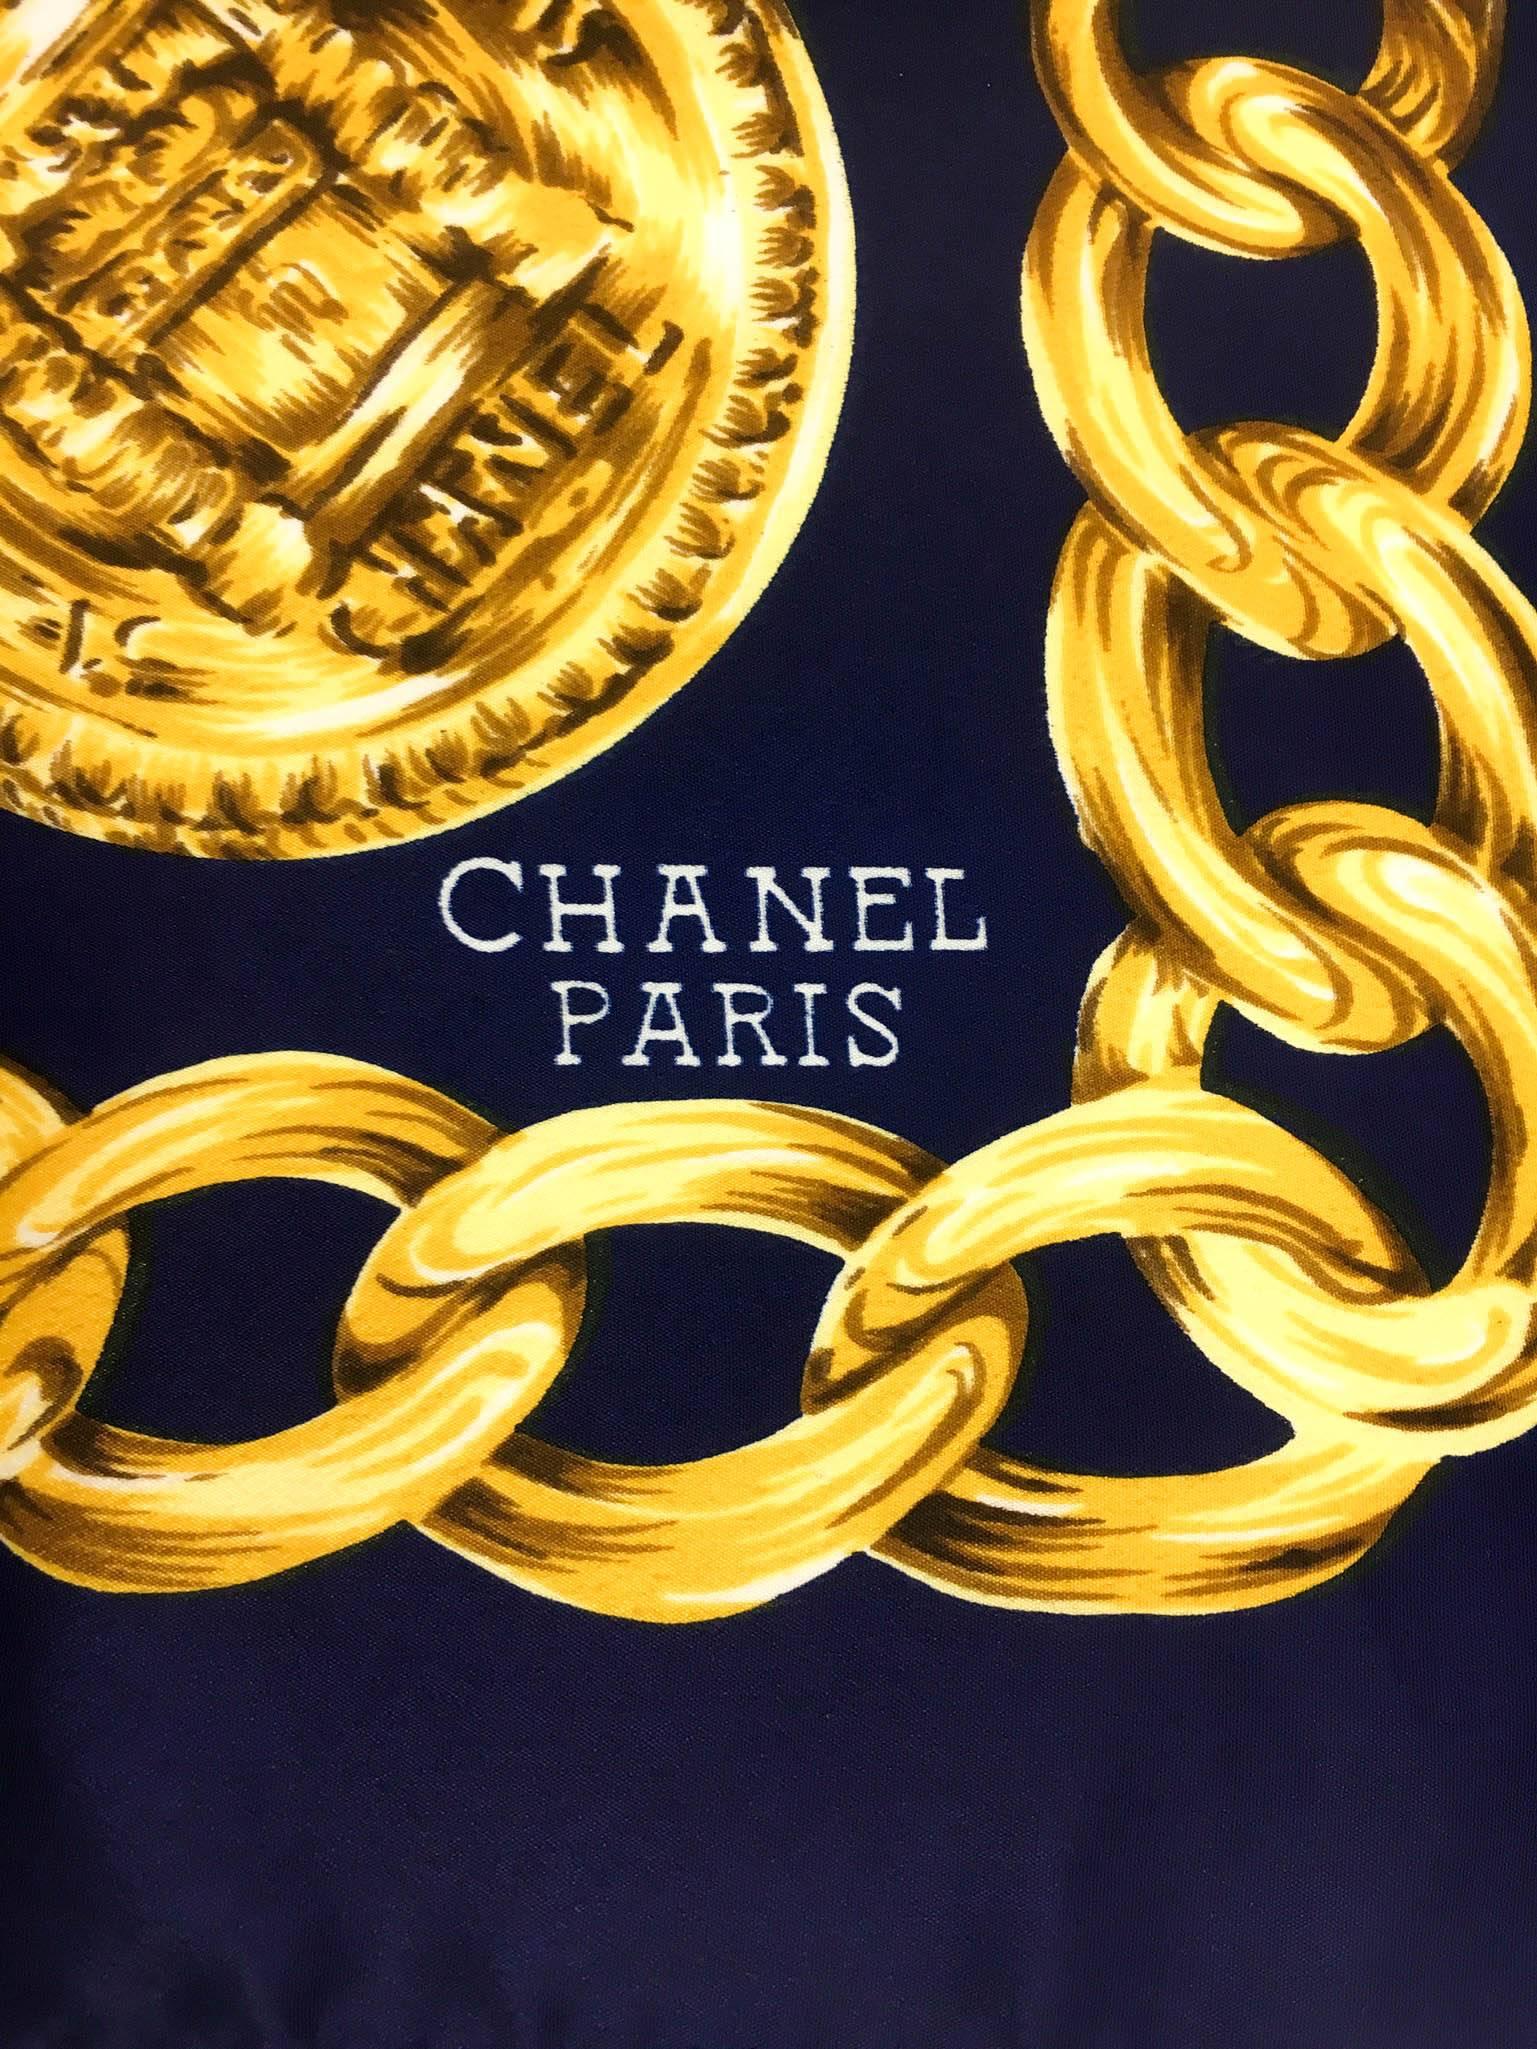 Chanel 'Chains' Navy Blue and Golden Scarf - 1990s 1